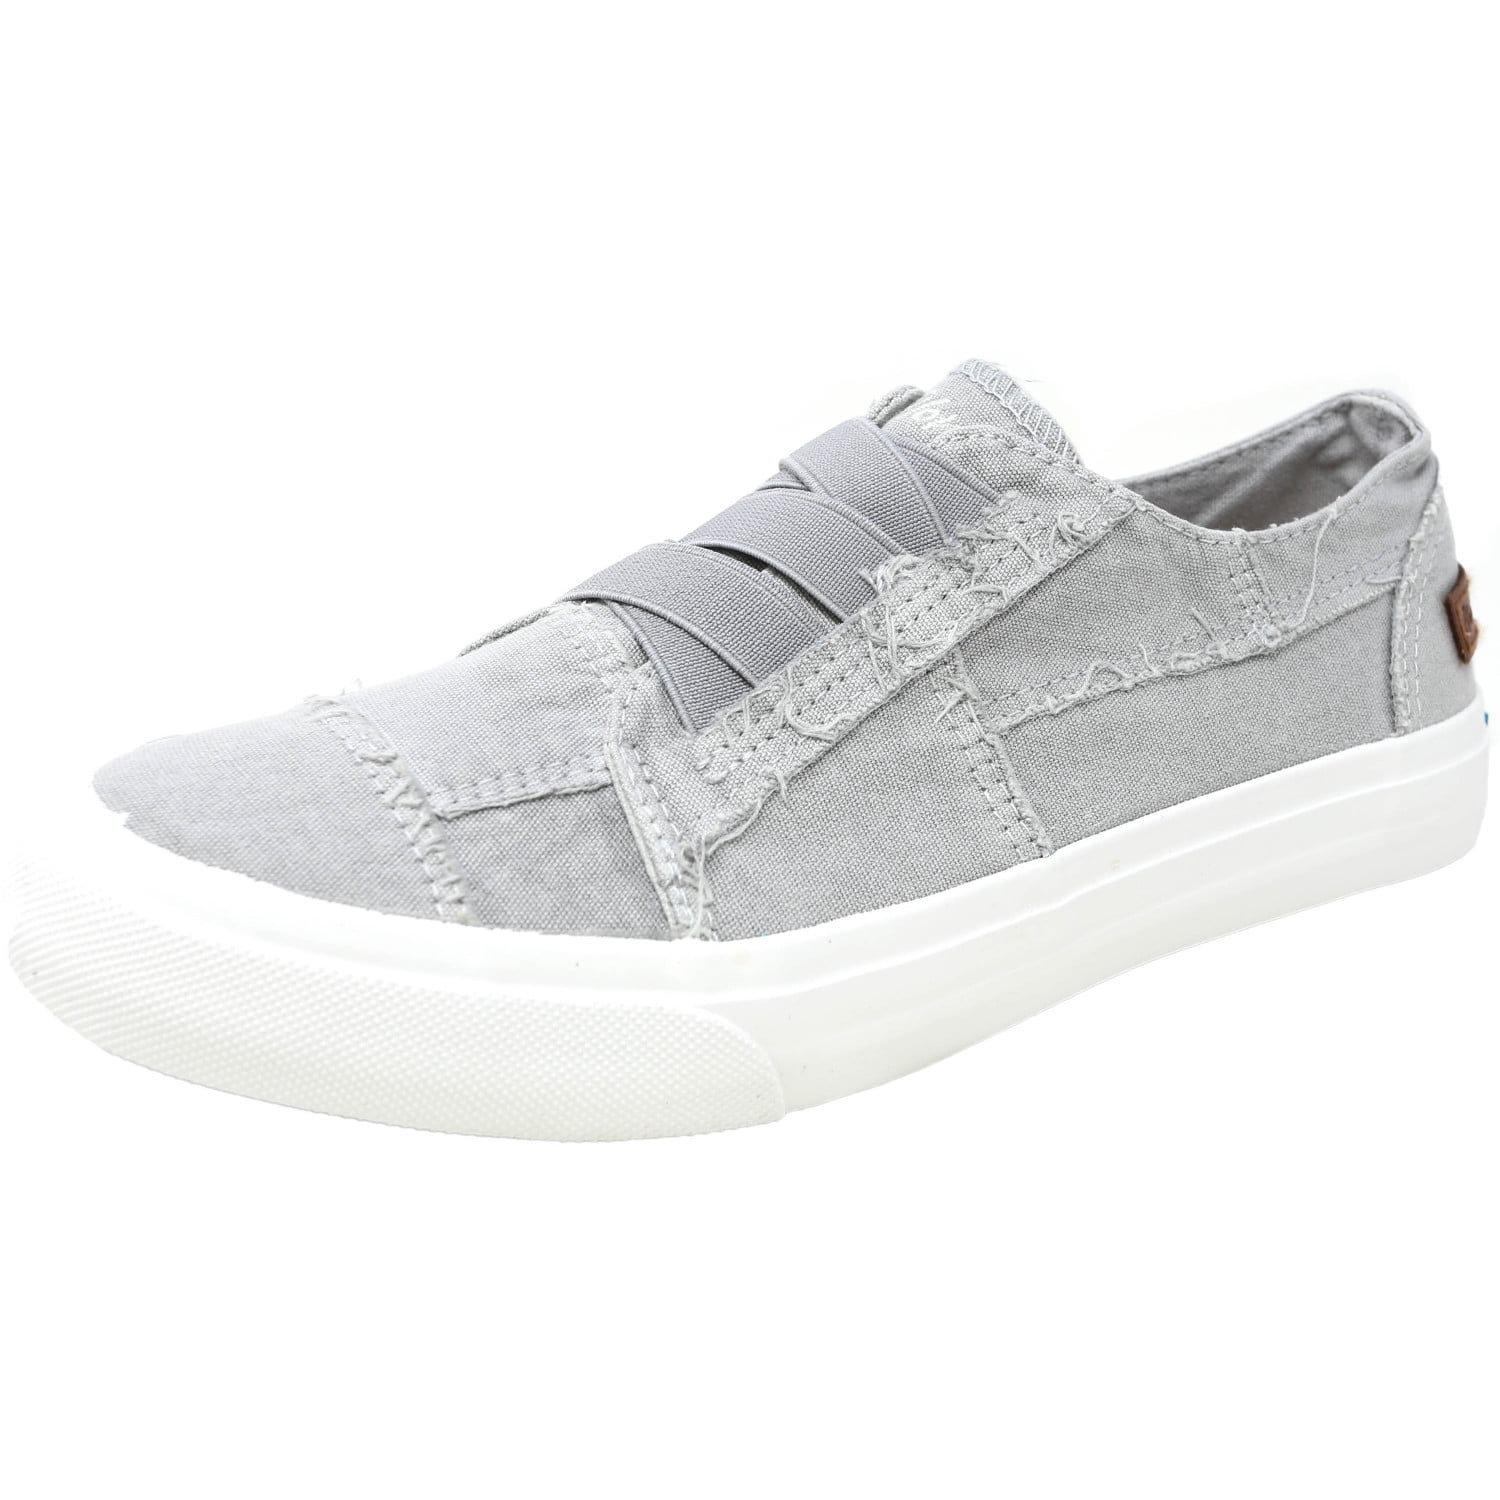 Blowfish - Blowfish Women's Marley Washed Canvas Sweet Gray Ankle-High ...